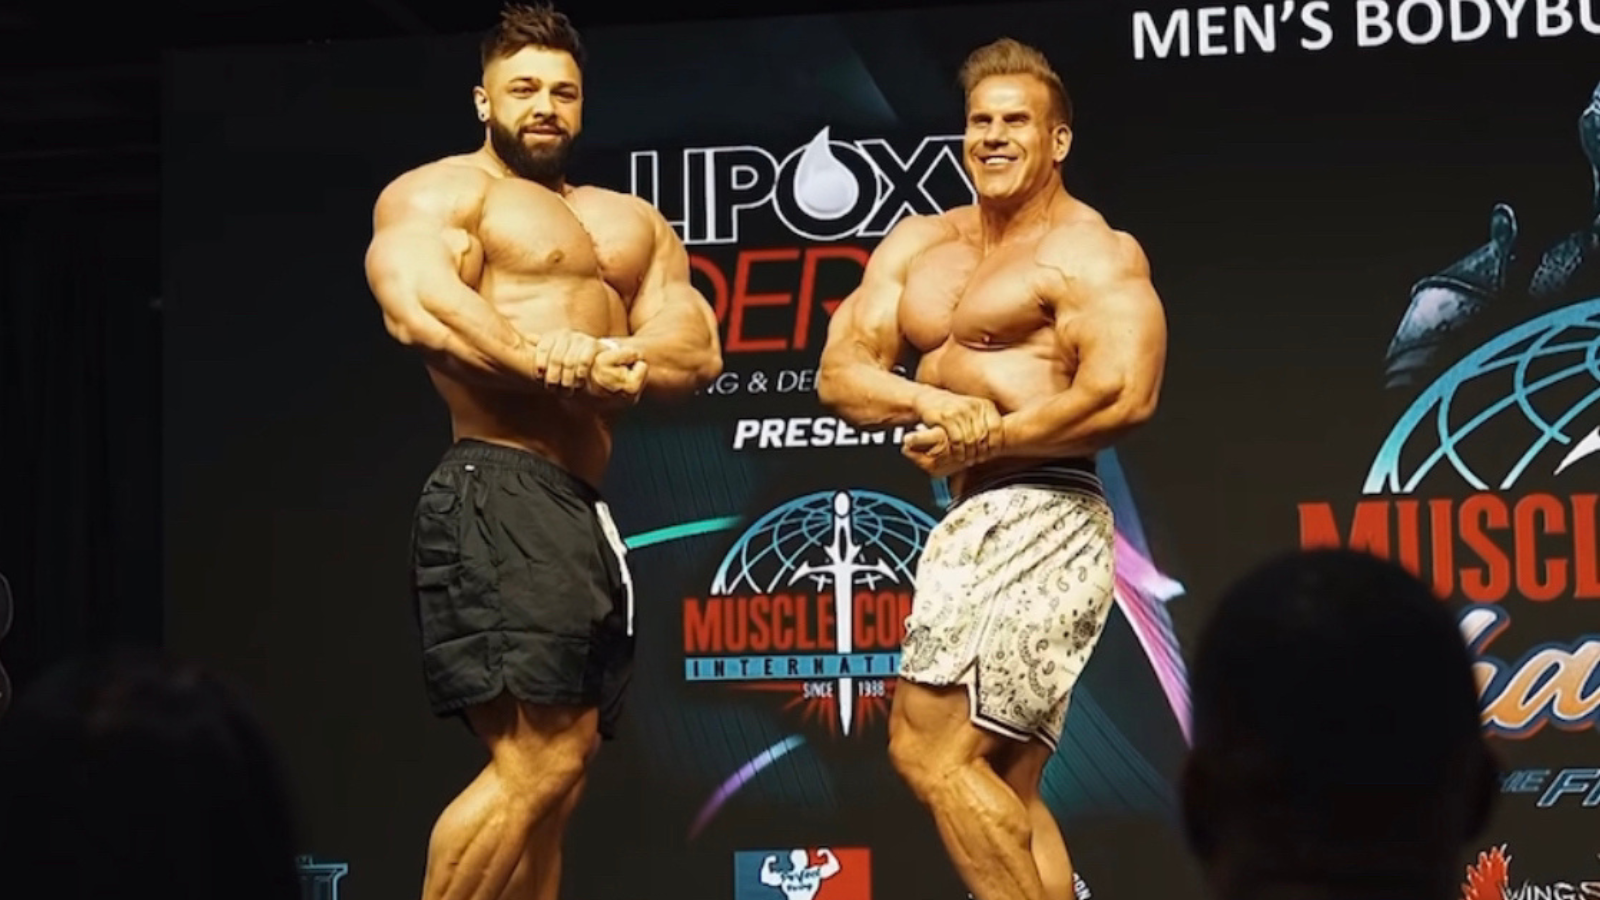 Legs So Big It Grew a Damn Arm”: Bodybuilding World Bows Down to Most  Iconic Rivalry Ever as Two Legendary Beasts Pose Alongside Each Other in a  Throwback Picture - EssentiallySports